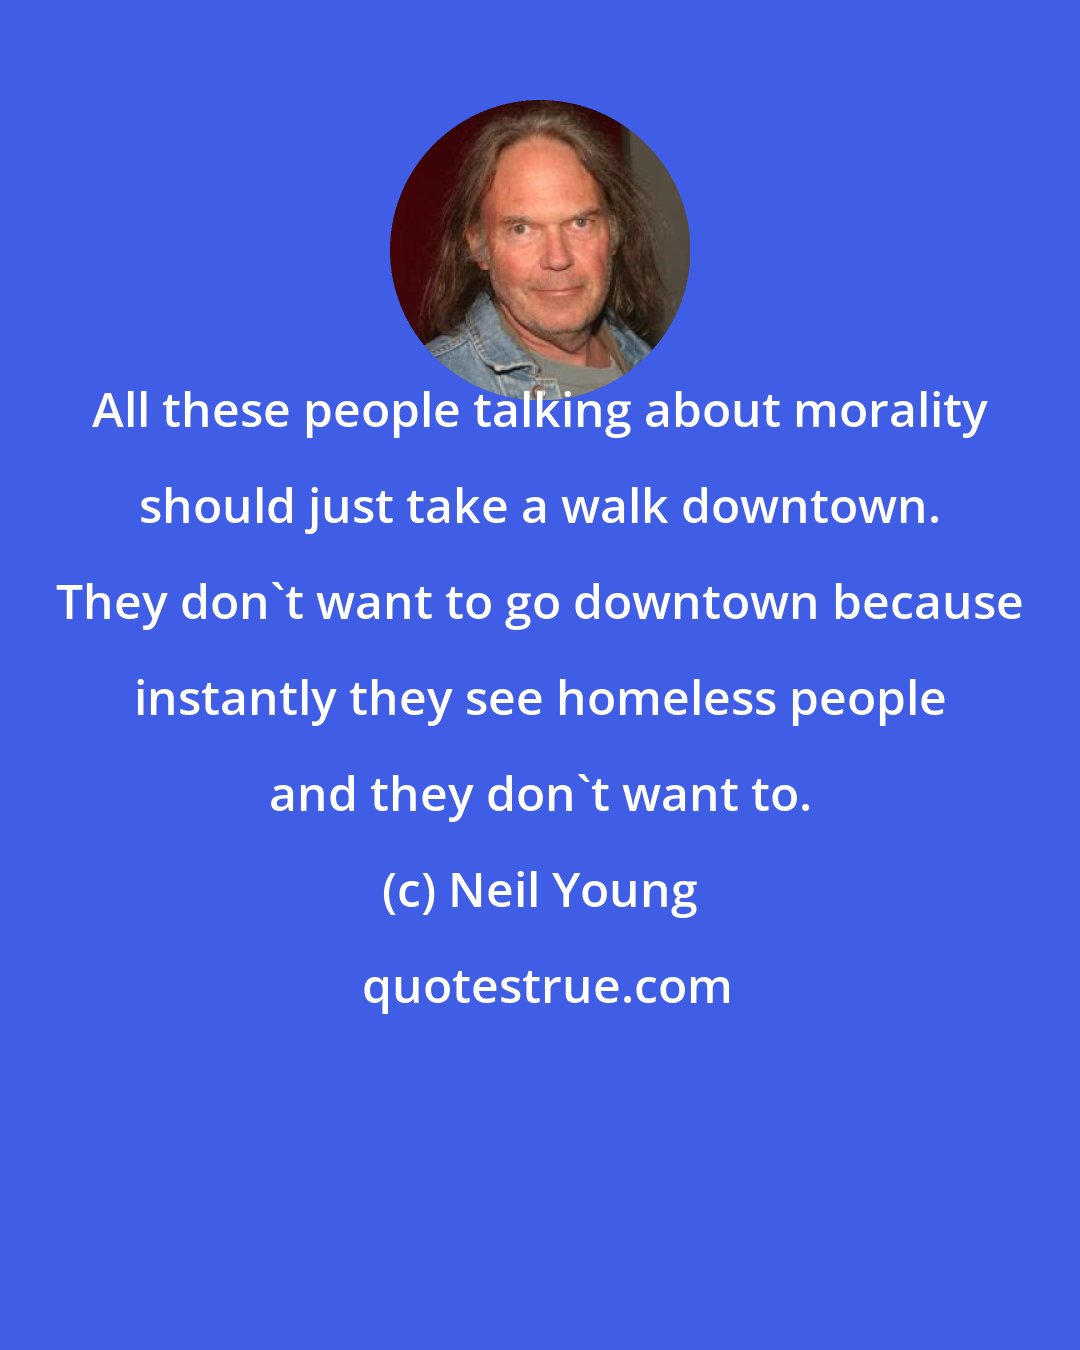 Neil Young: All these people talking about morality should just take a walk downtown. They don't want to go downtown because instantly they see homeless people and they don't want to.